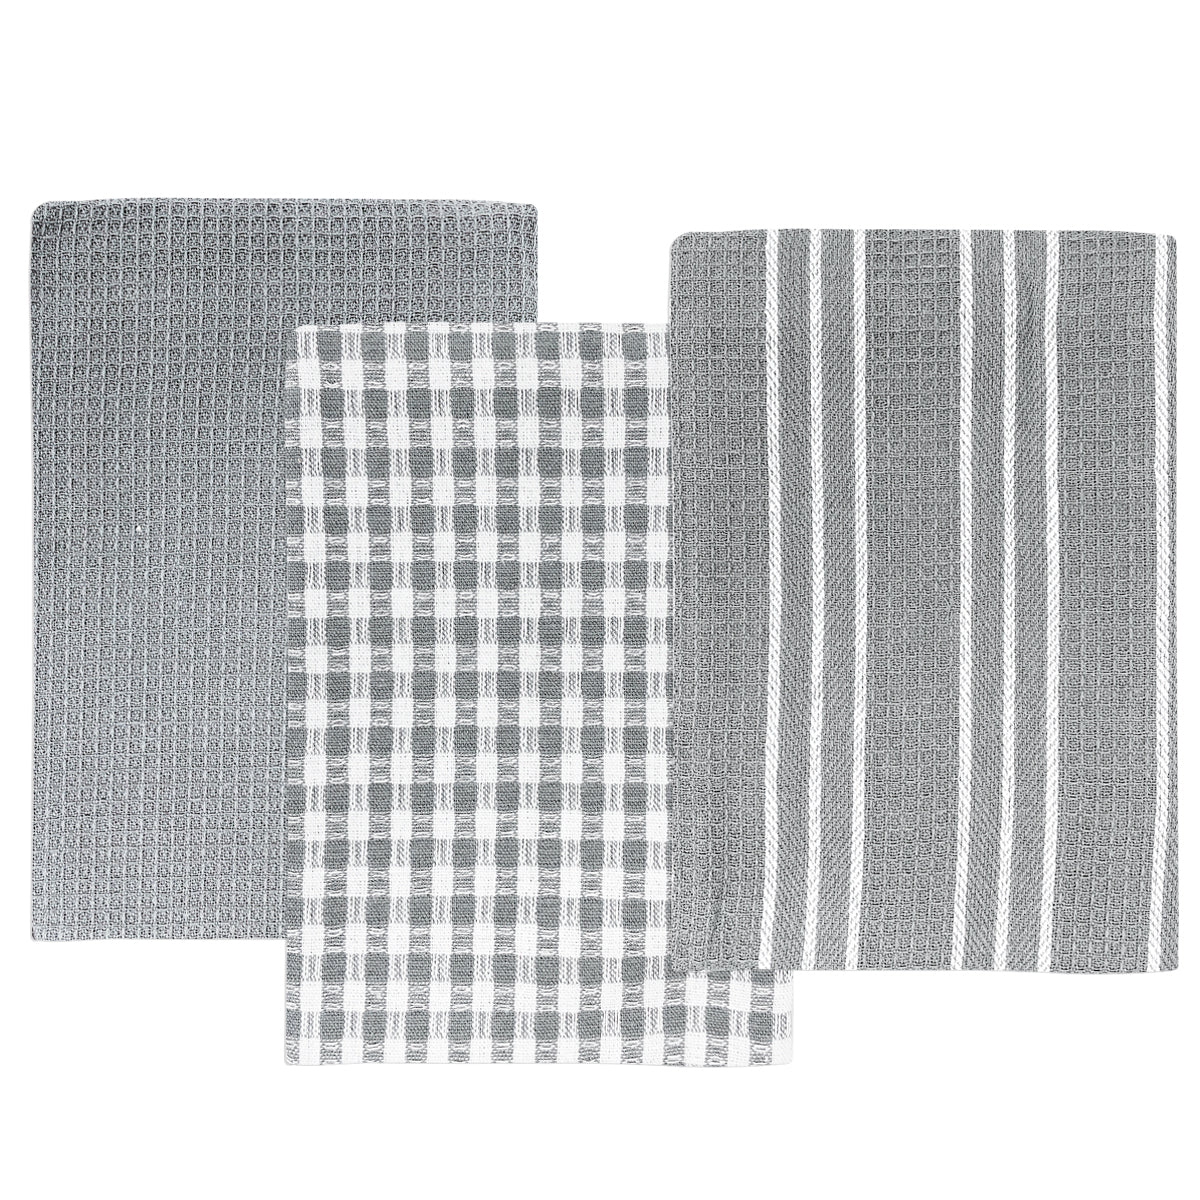 Wrapables® 100% Cotton Kitchen Dish Towels (Set of 3)